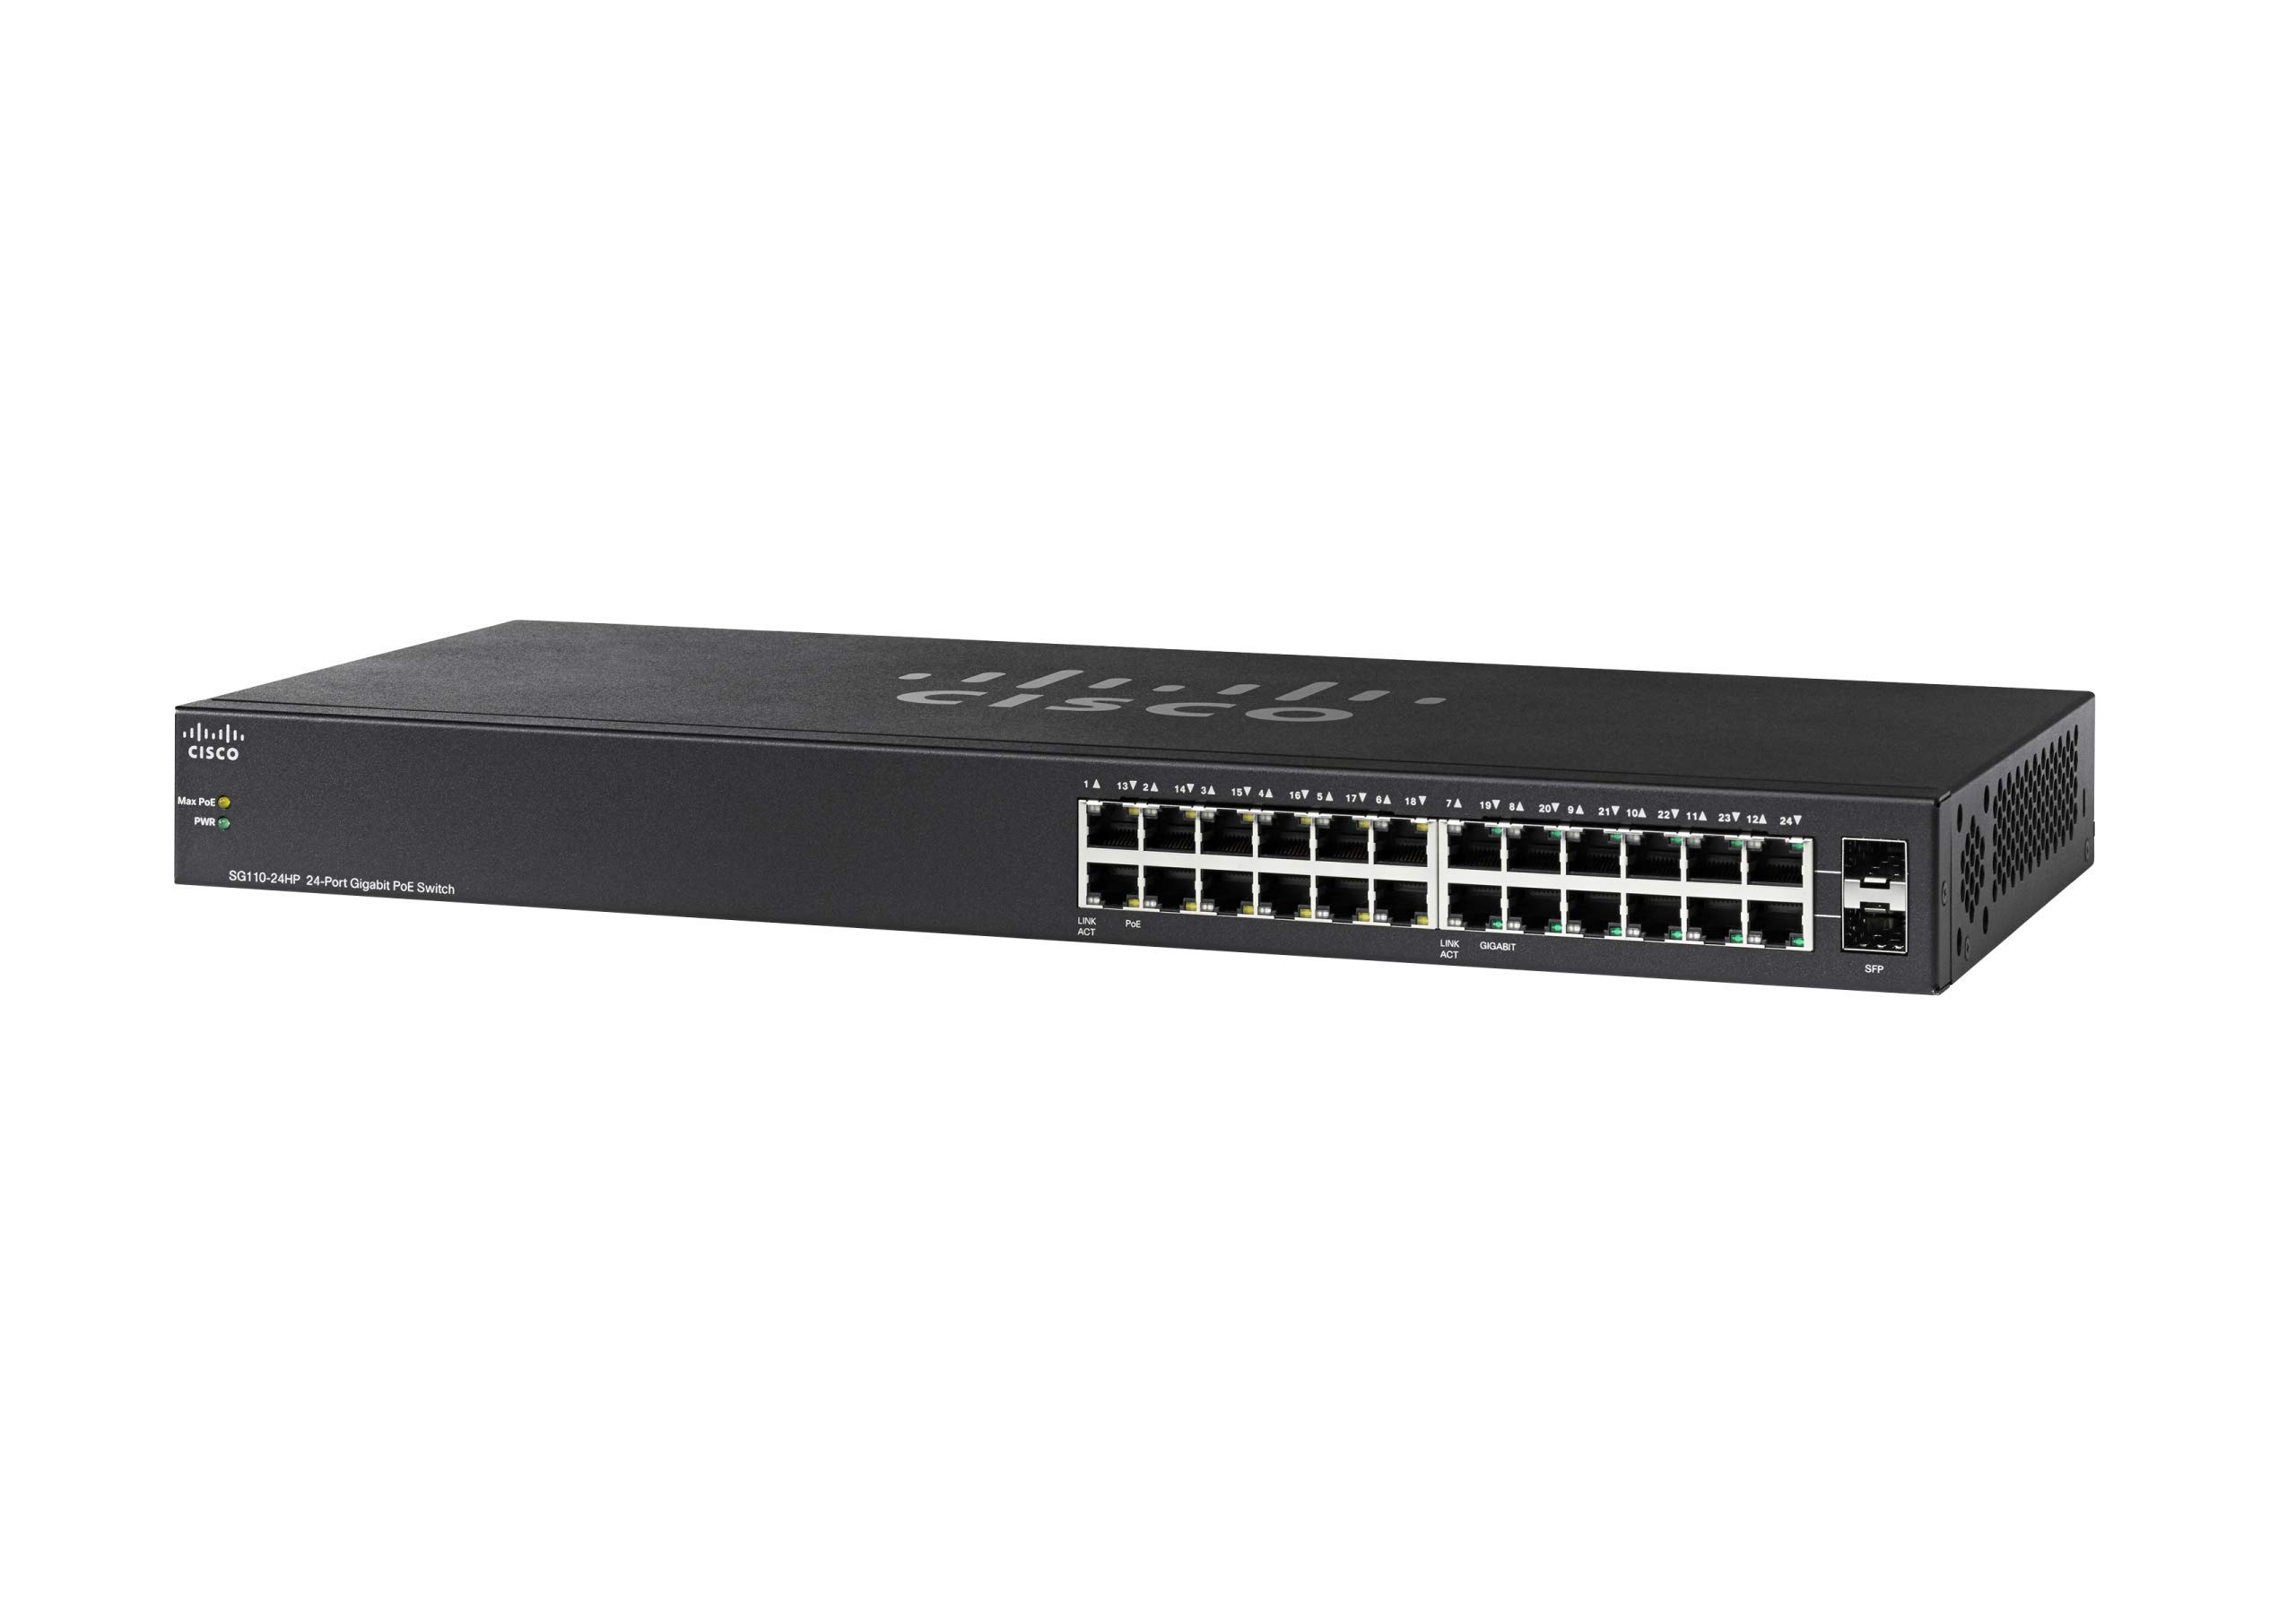 Cisco SG110-24HP Unmanaged Switch | 24 Gigabit Ethernet (GbE) Ports | 100W PoE | Limited Lifetime Protection (SG110-24HP-NA)